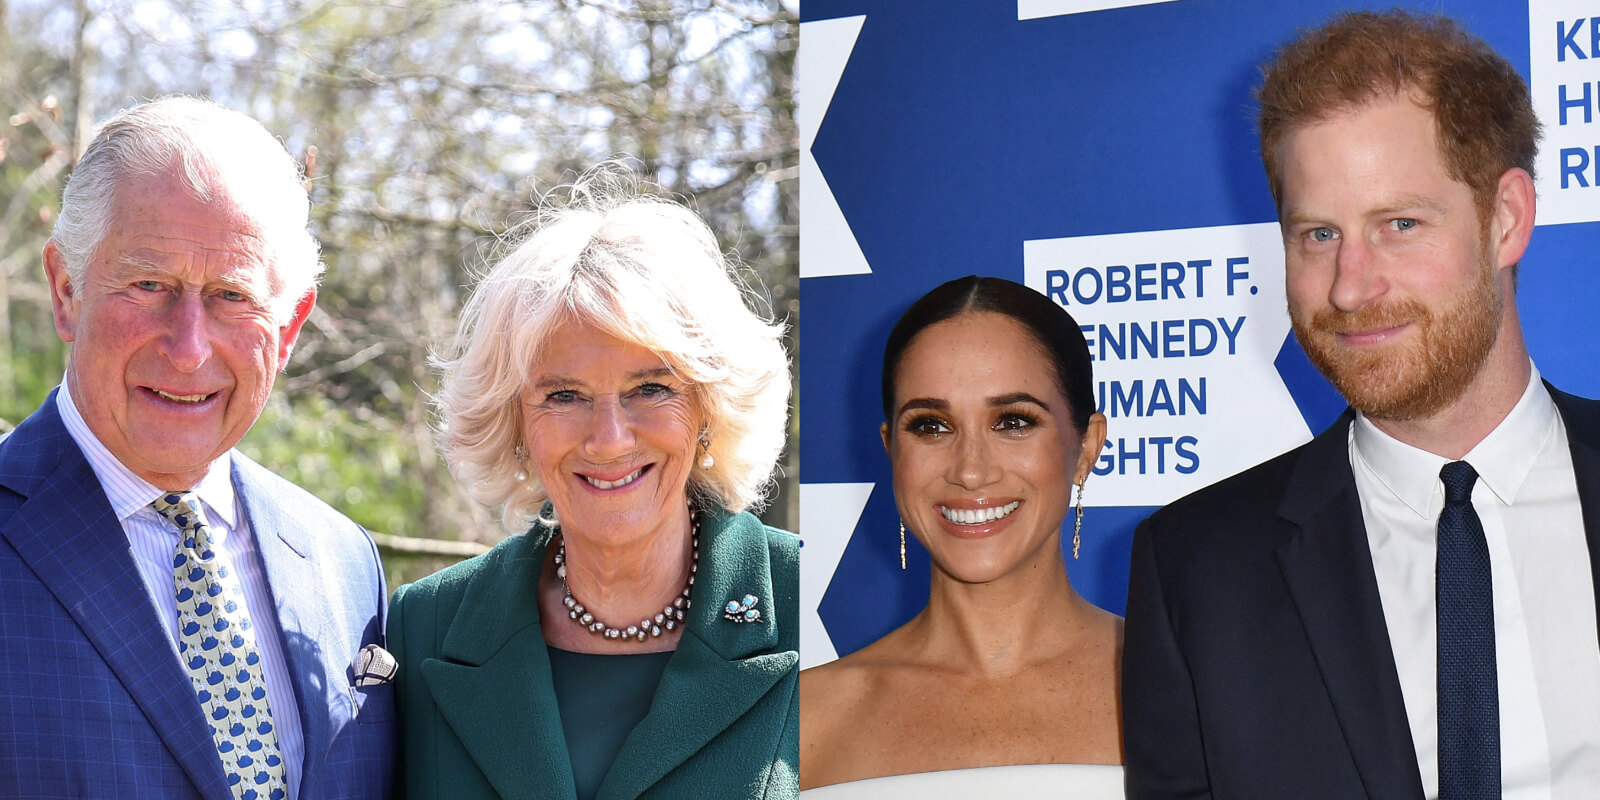 King Charles, Camilla Parker Bowles, Meghan Markle, and Prince Harry in side-by-side photographs.